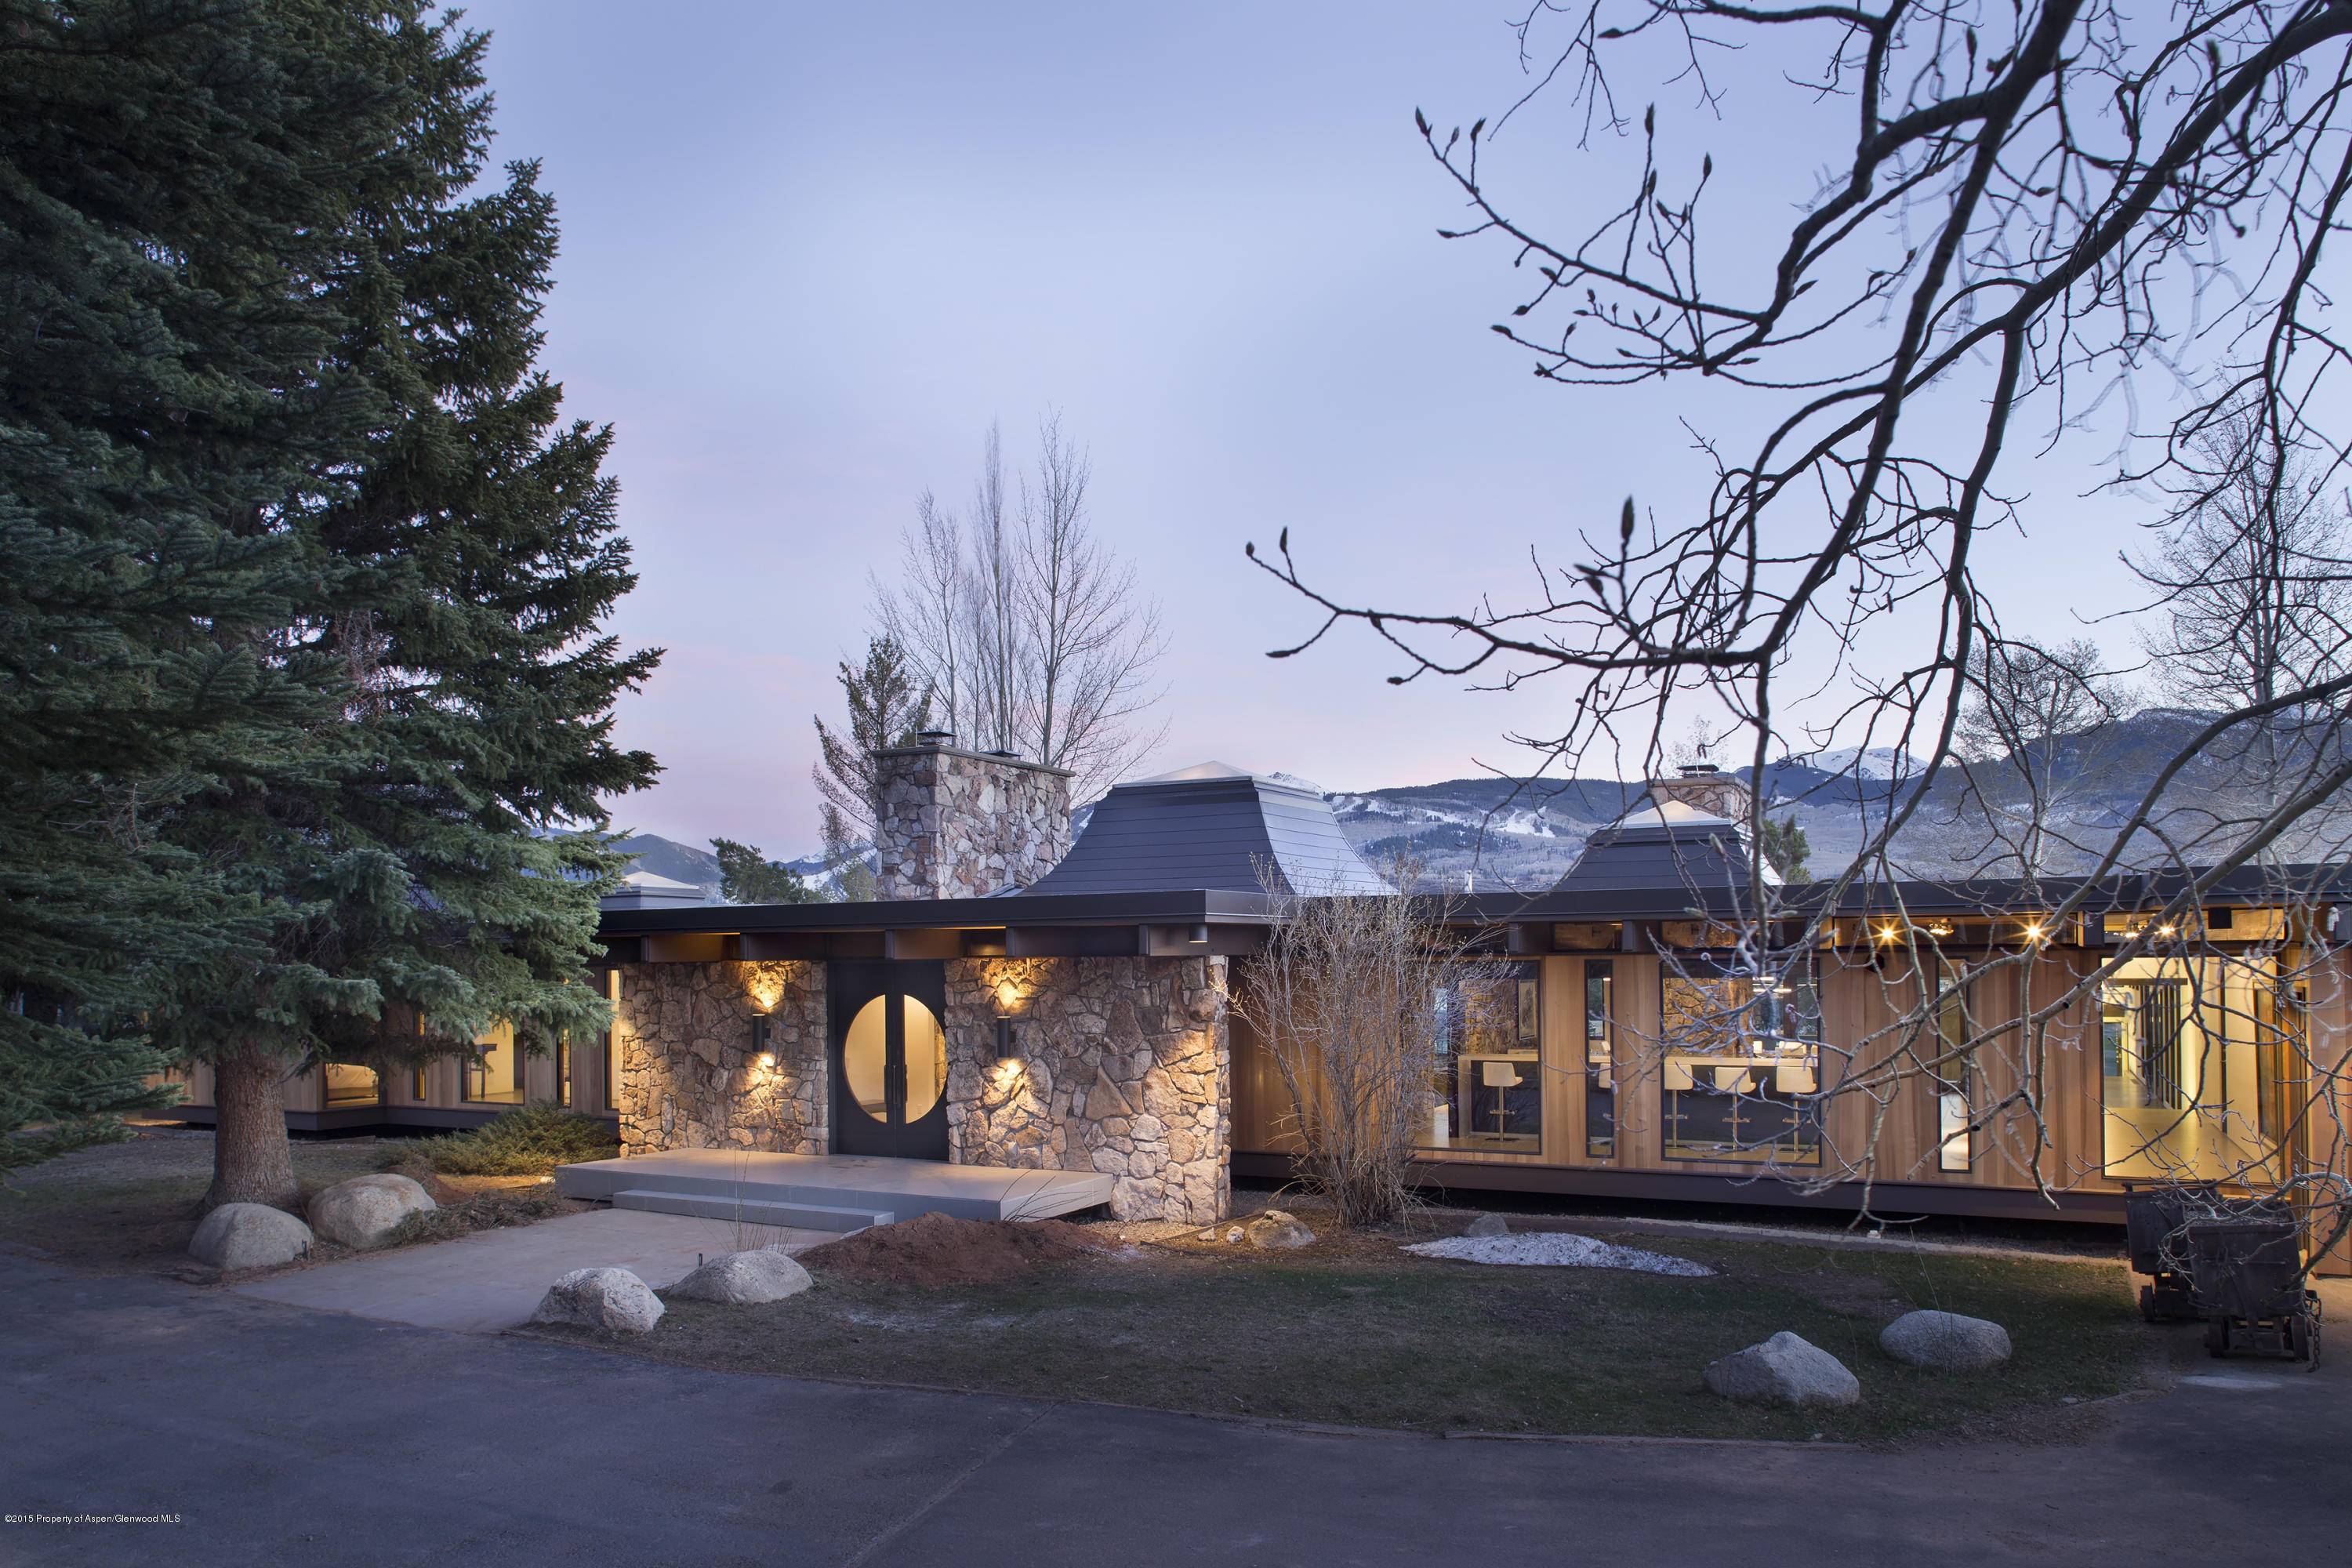 Remodeled in 2014, this beautiful, custom contemporary 5 bedroom home on McLain Flats features floor to ceiling windows encompassing 180 degree views of ski mountains from Aspen to Snowmass.